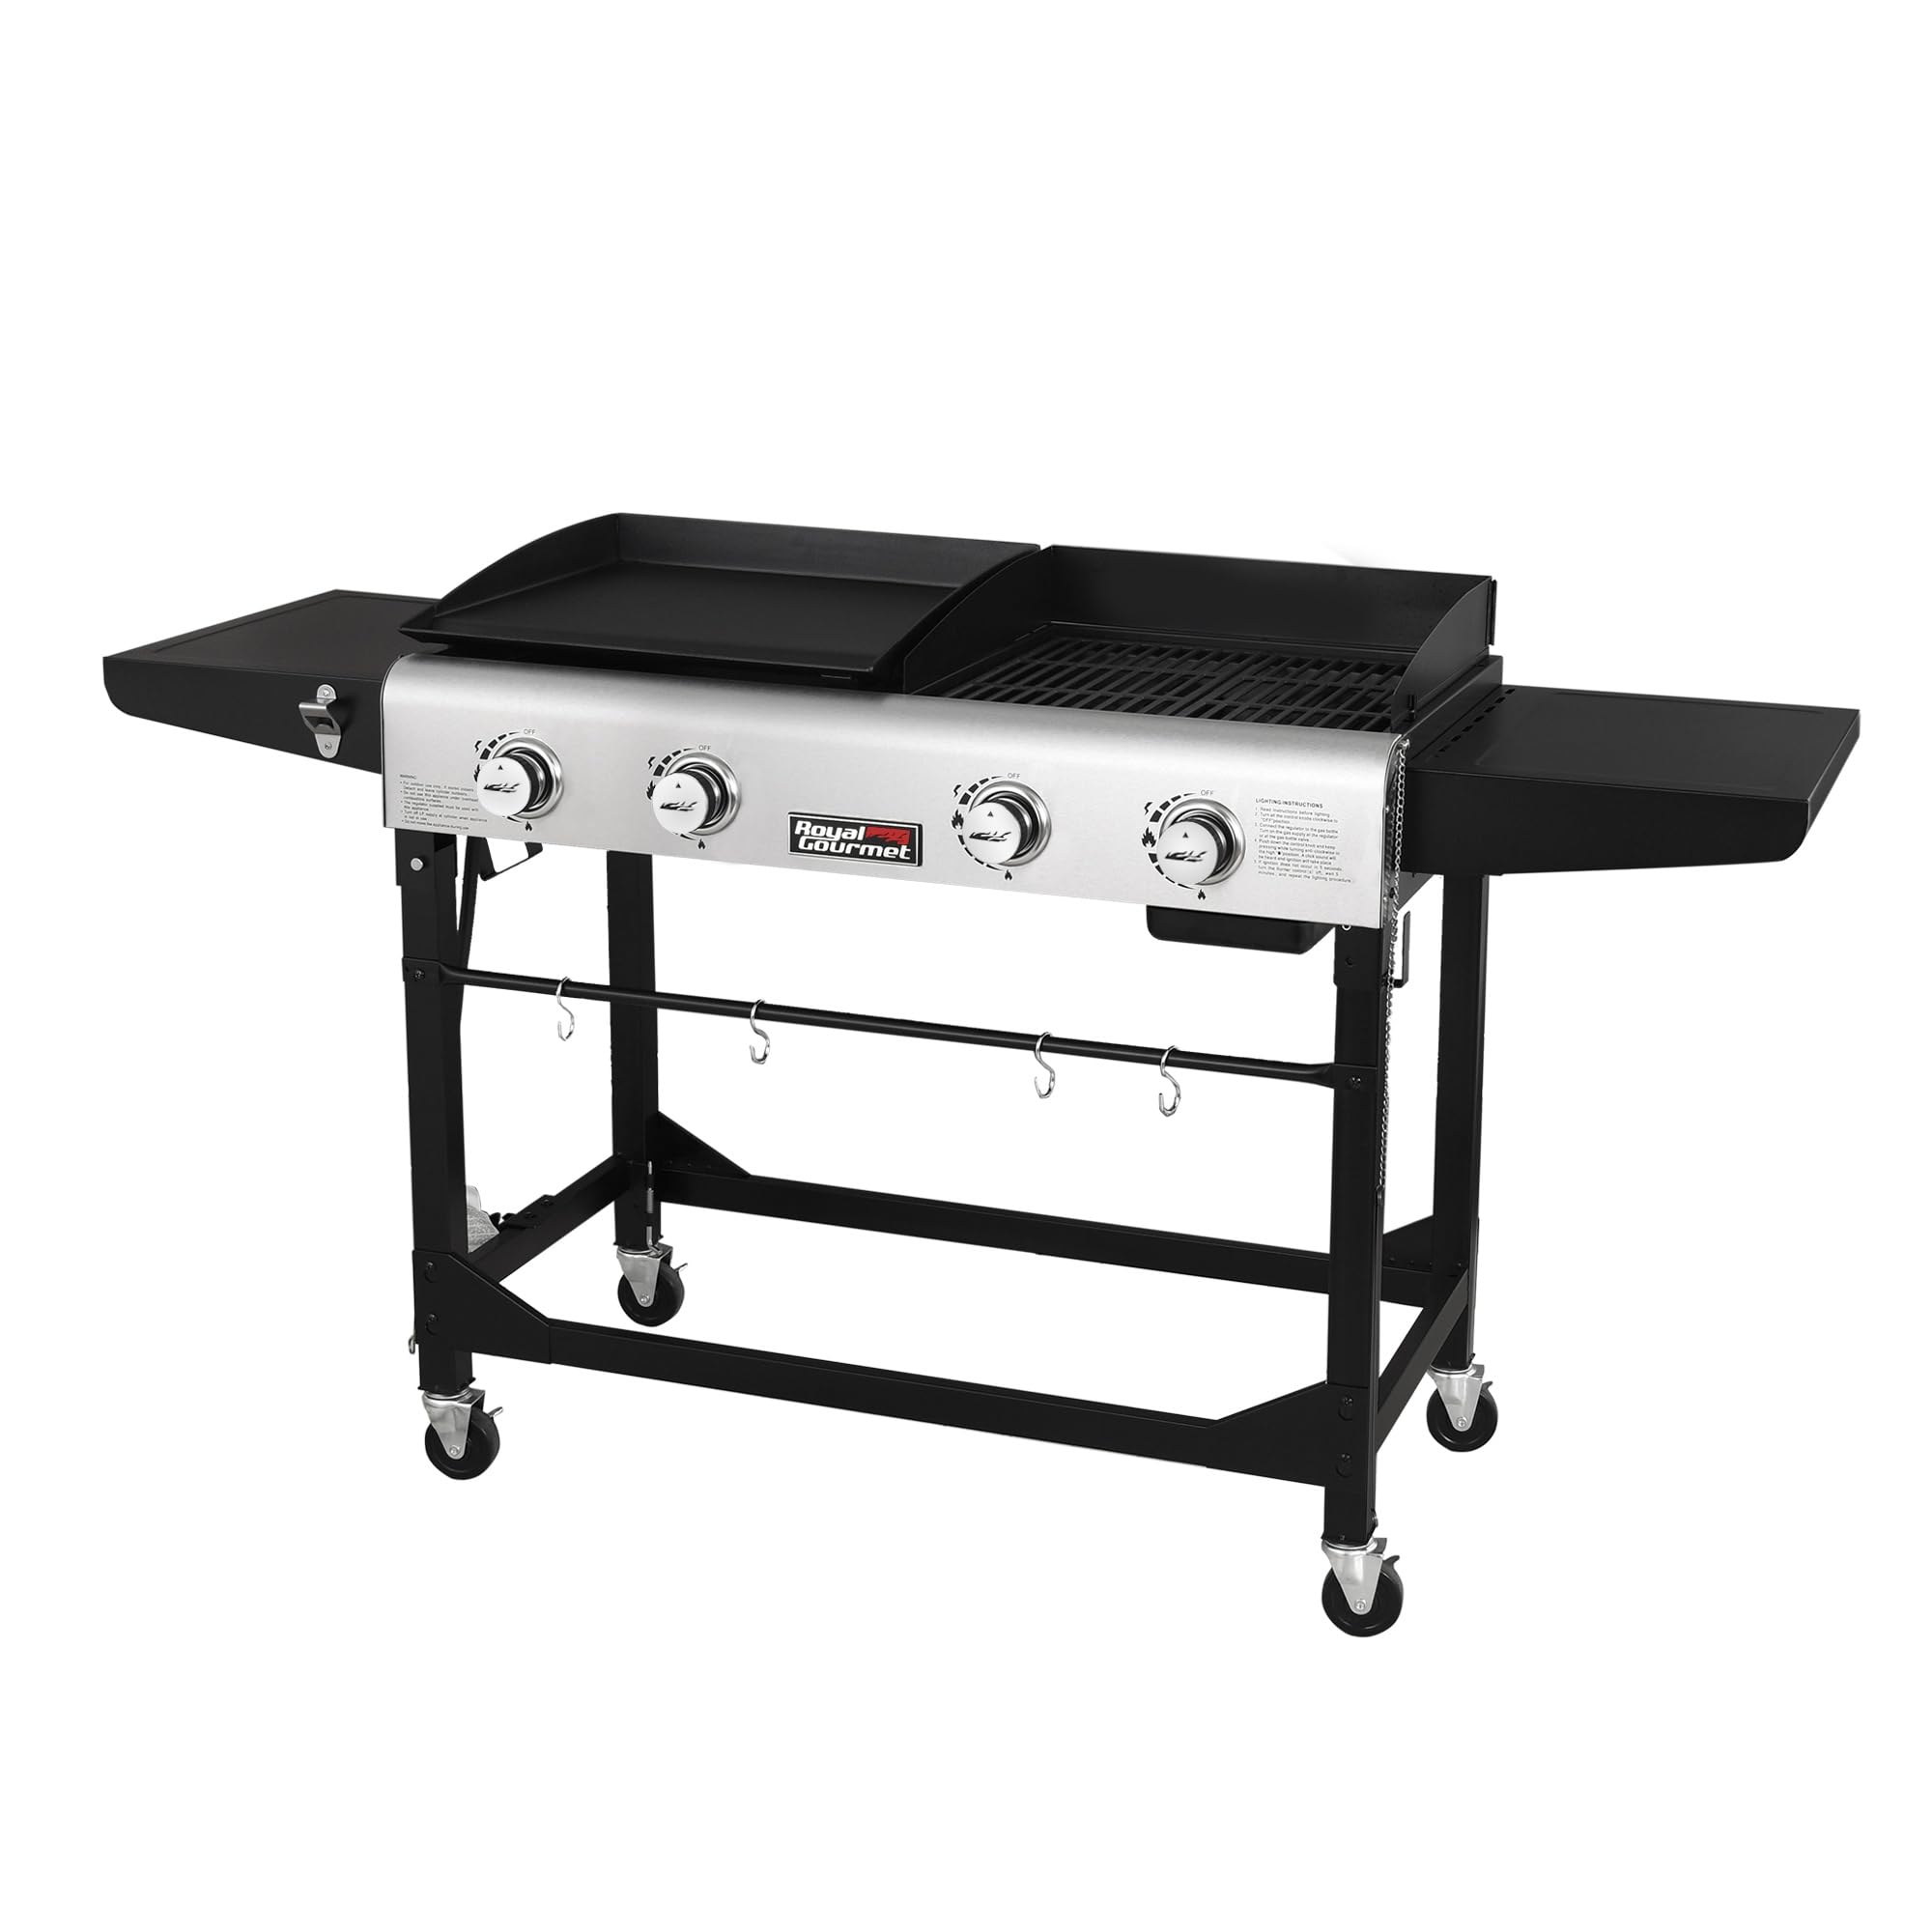 4-Burner Royal Gourmet Liquid Propane Gas Grill & Griddle Combo w/ Side Table $176 + Free Shipping